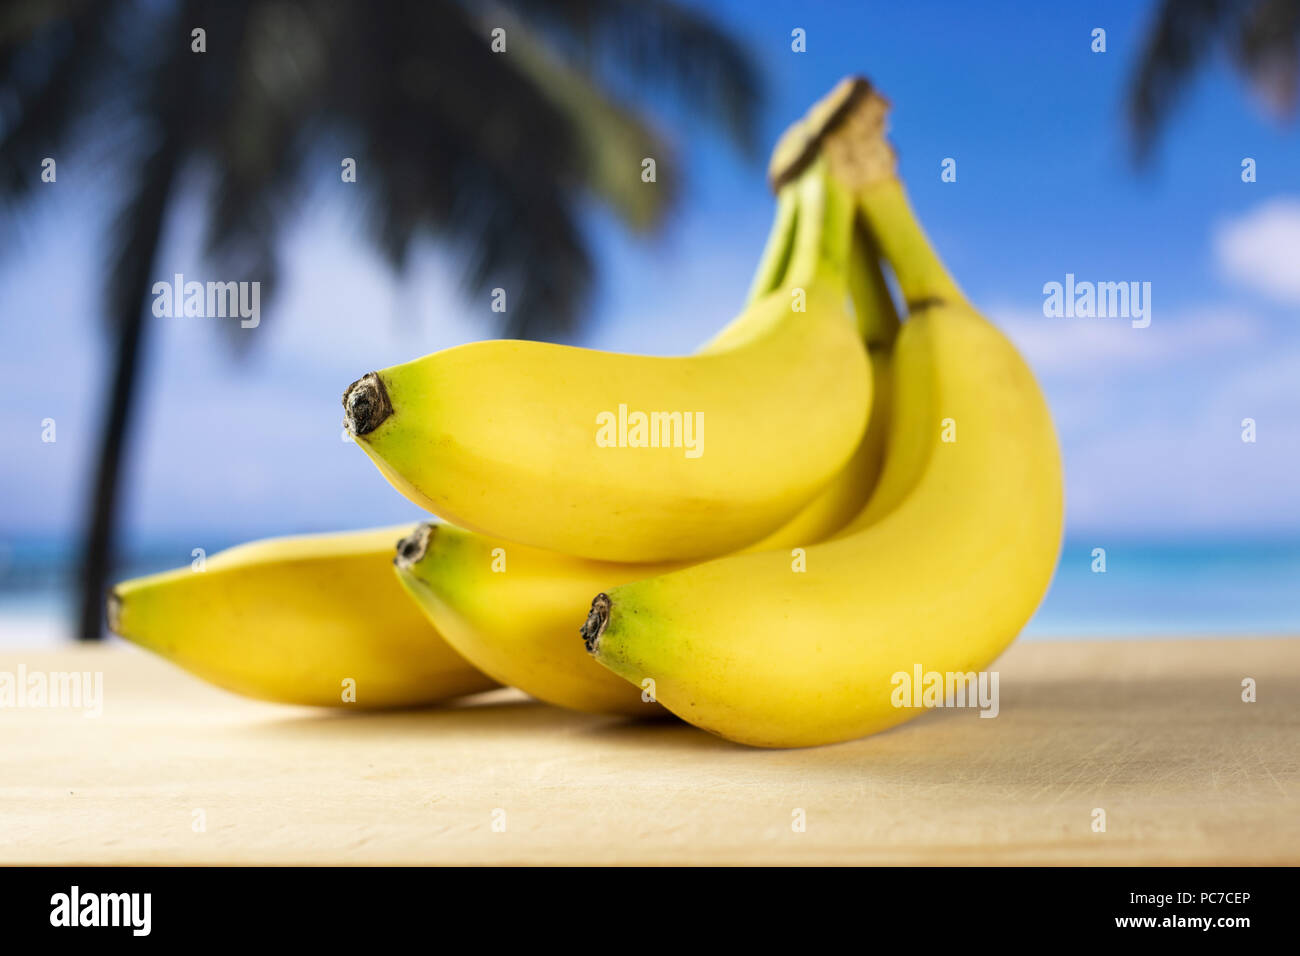 Group of four whole fresh yellow banana one cluster with palm trees on the beach in background Stock Photo